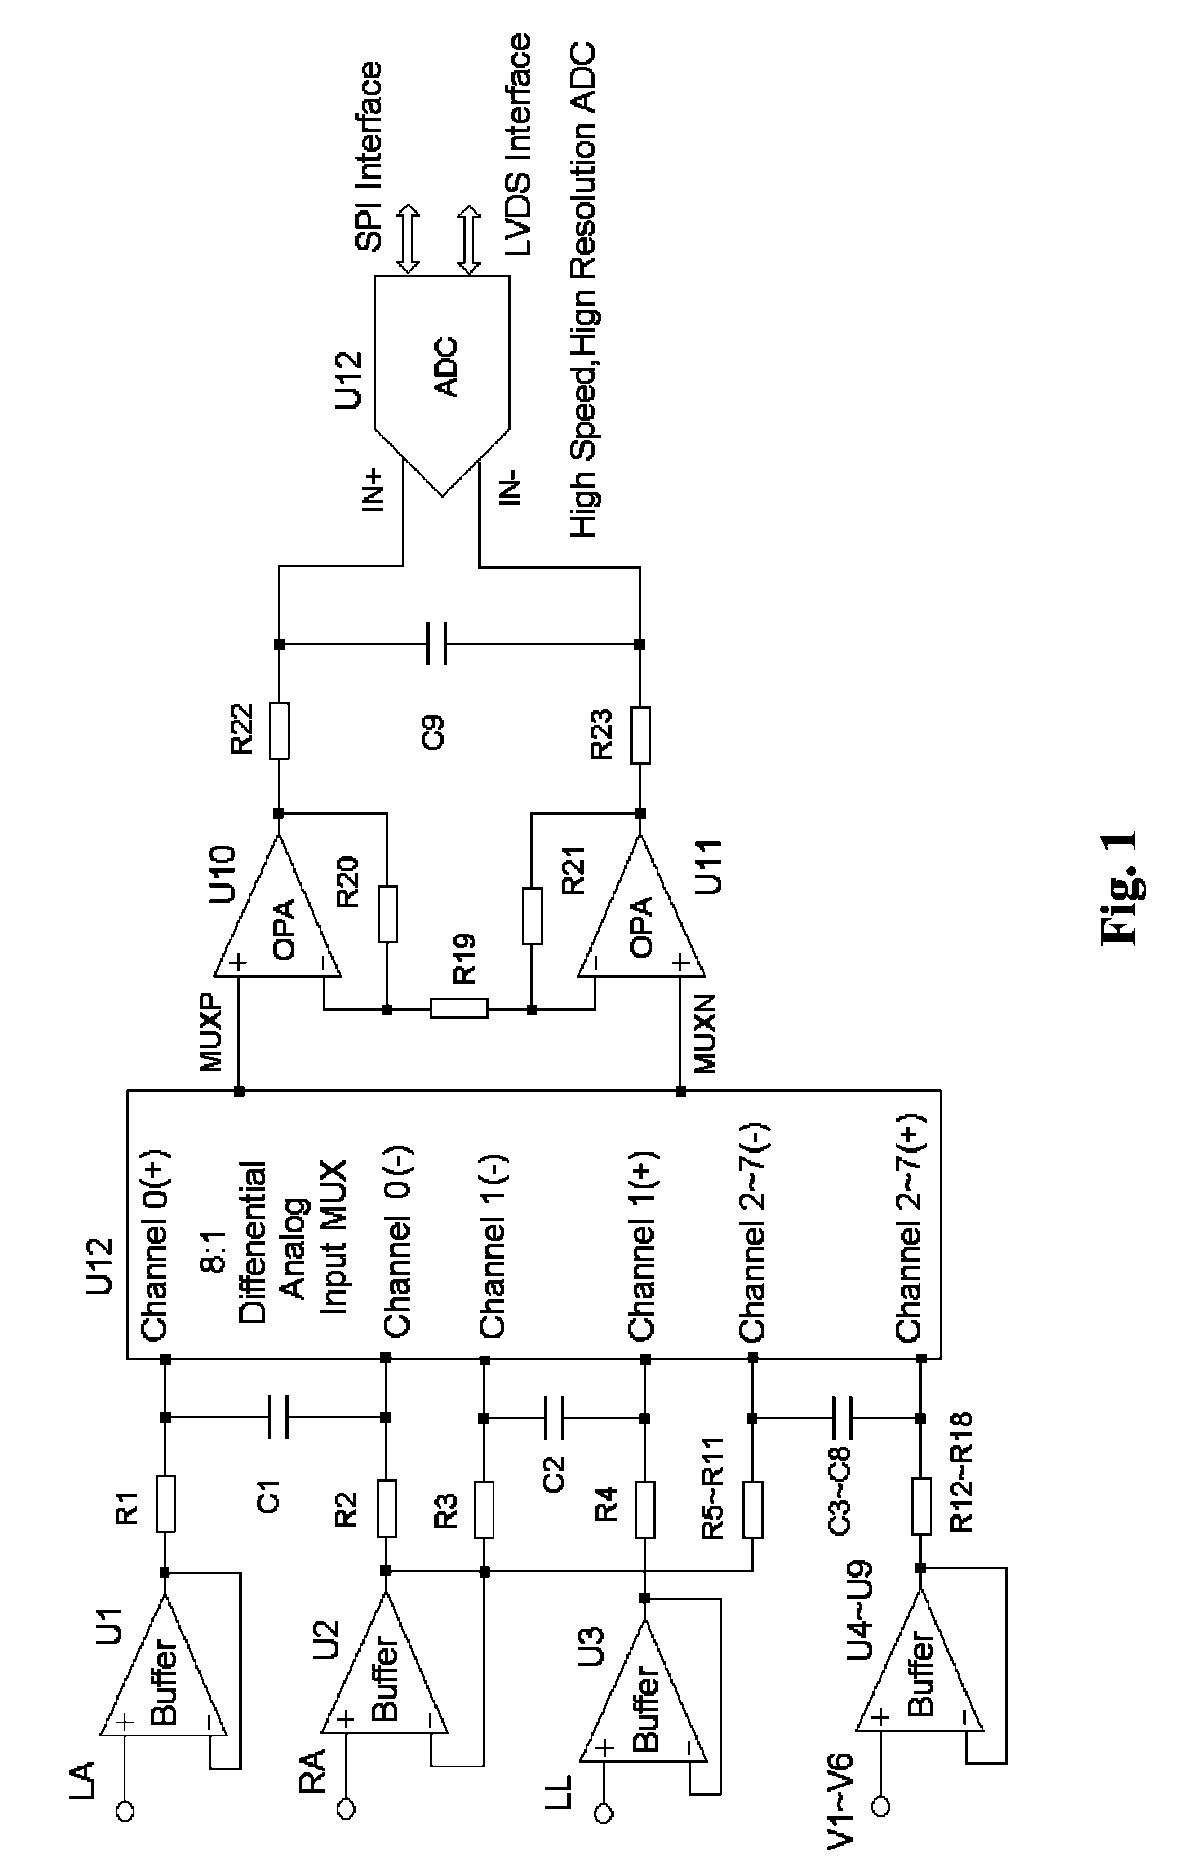 Fully differential non-inverted parallel amplifier for detecting biology electrical signal